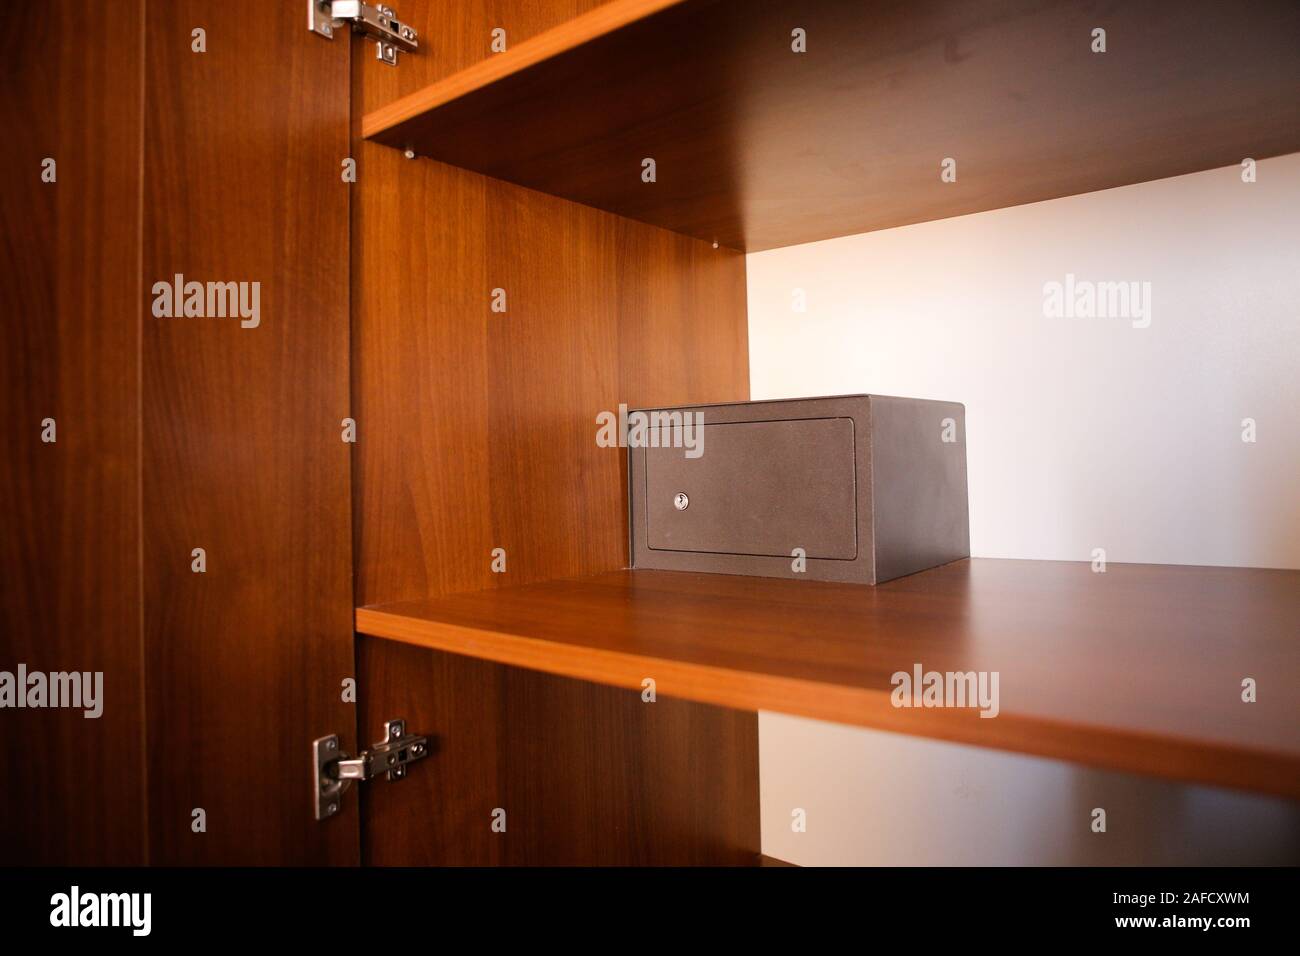 Metal safe inside an empty wooden closet in a hotel room Stock Photo